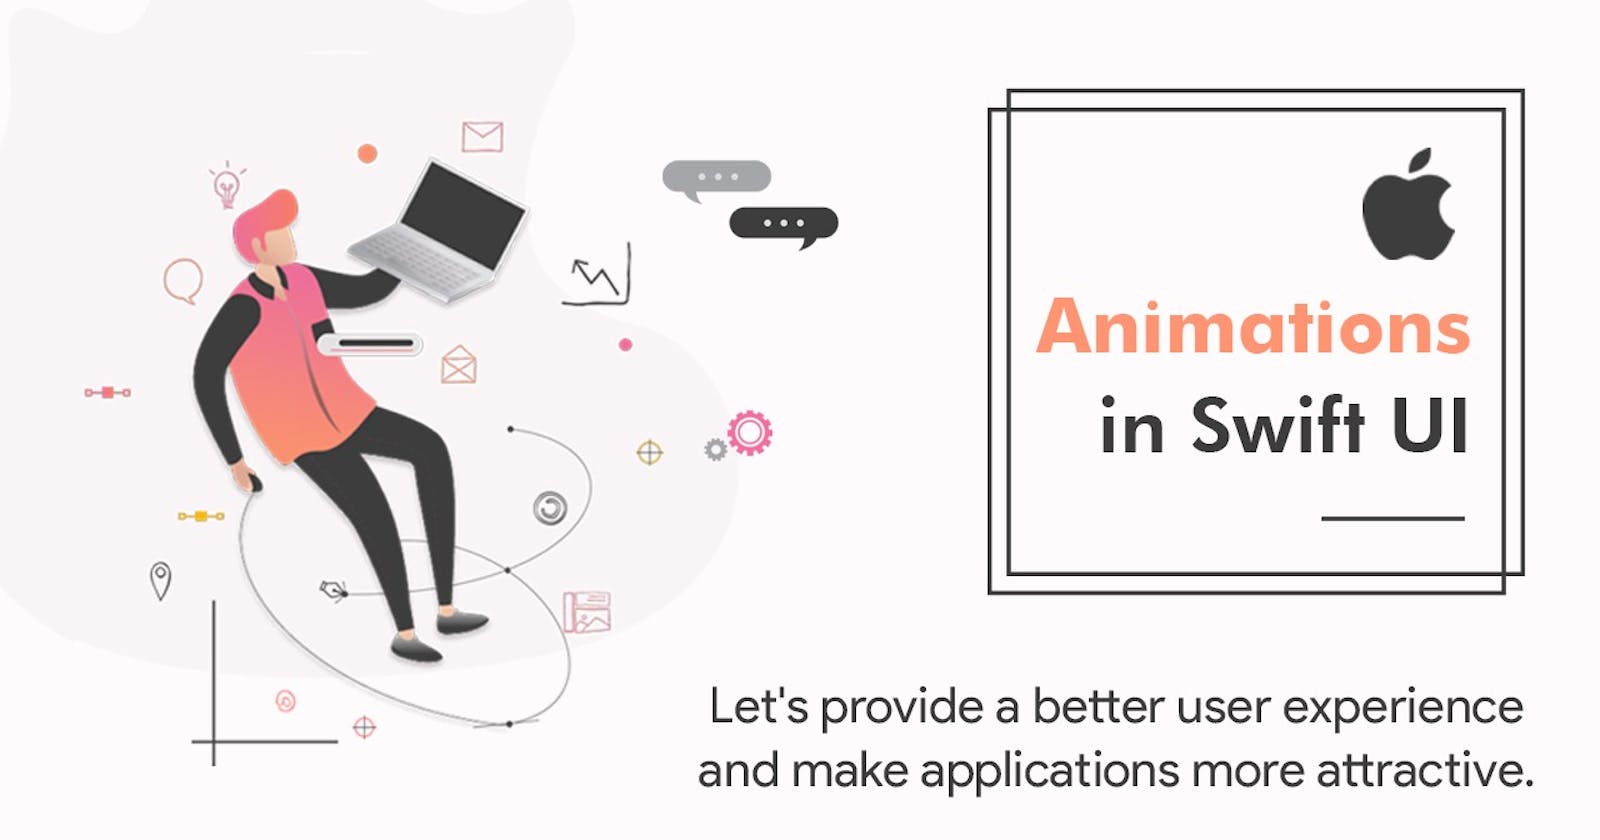 Animations in SwiftUI with examples